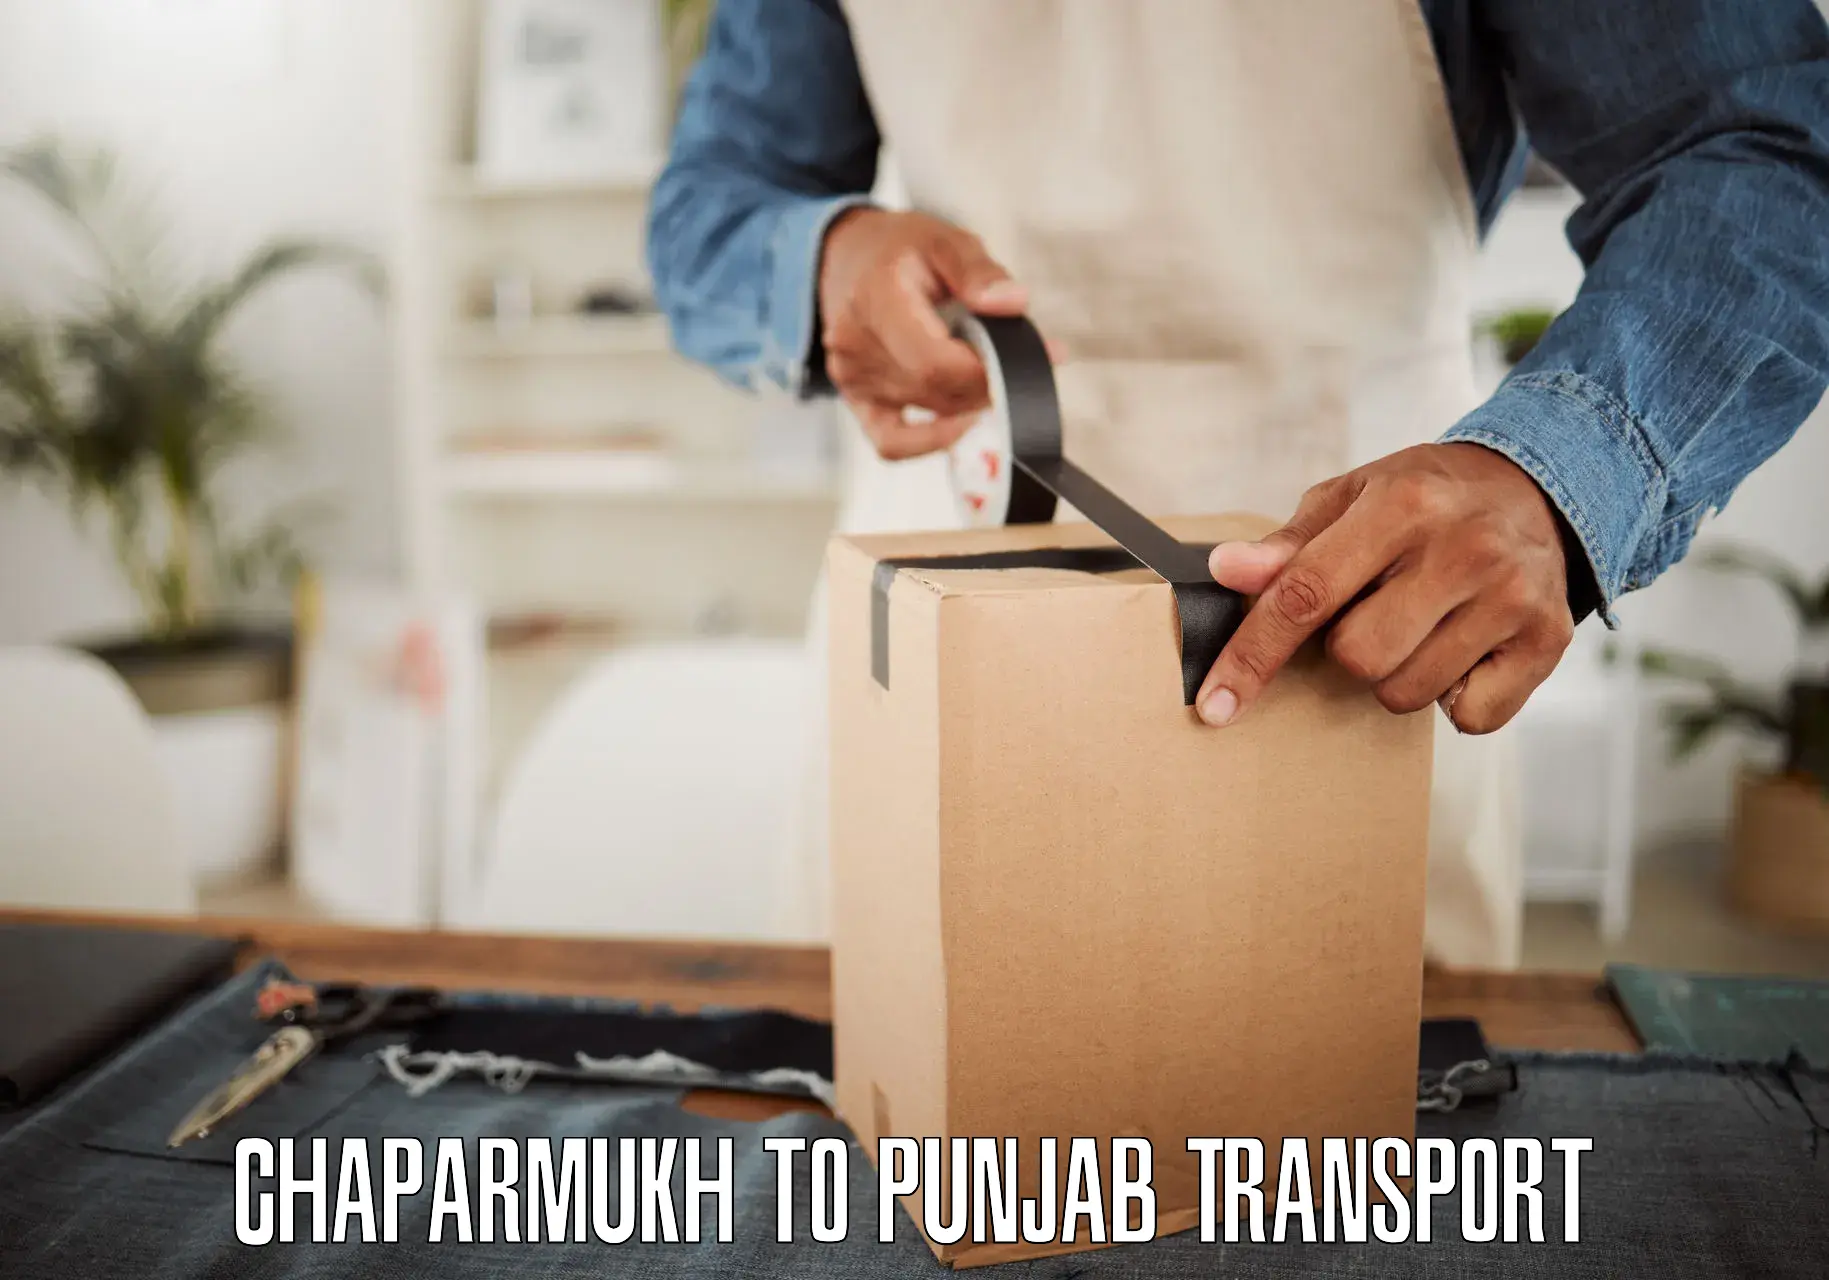 Daily parcel service transport Chaparmukh to Bathinda